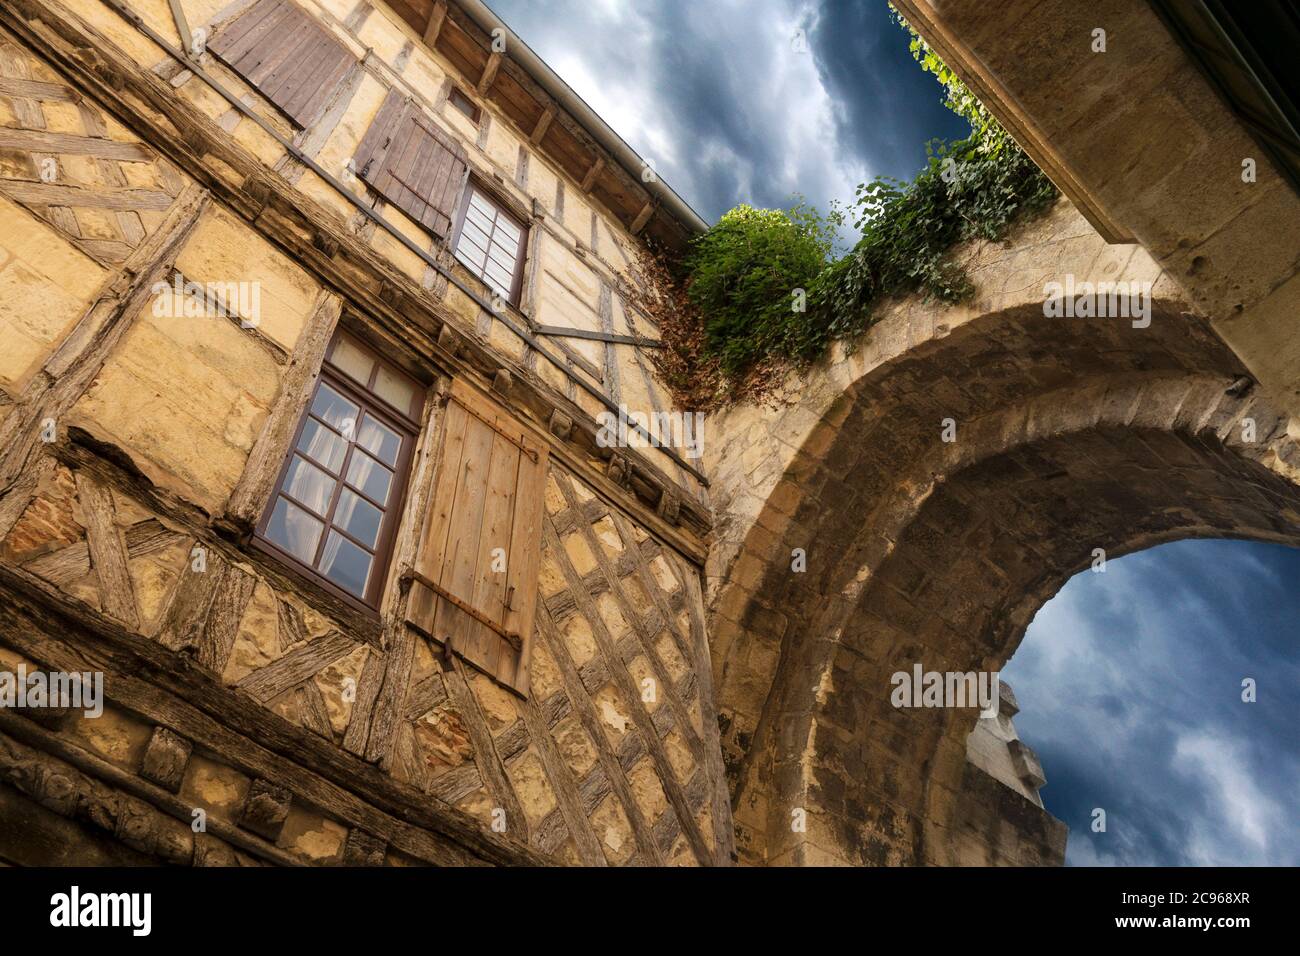 French medieval building in Saint Emilion France Stock Photo